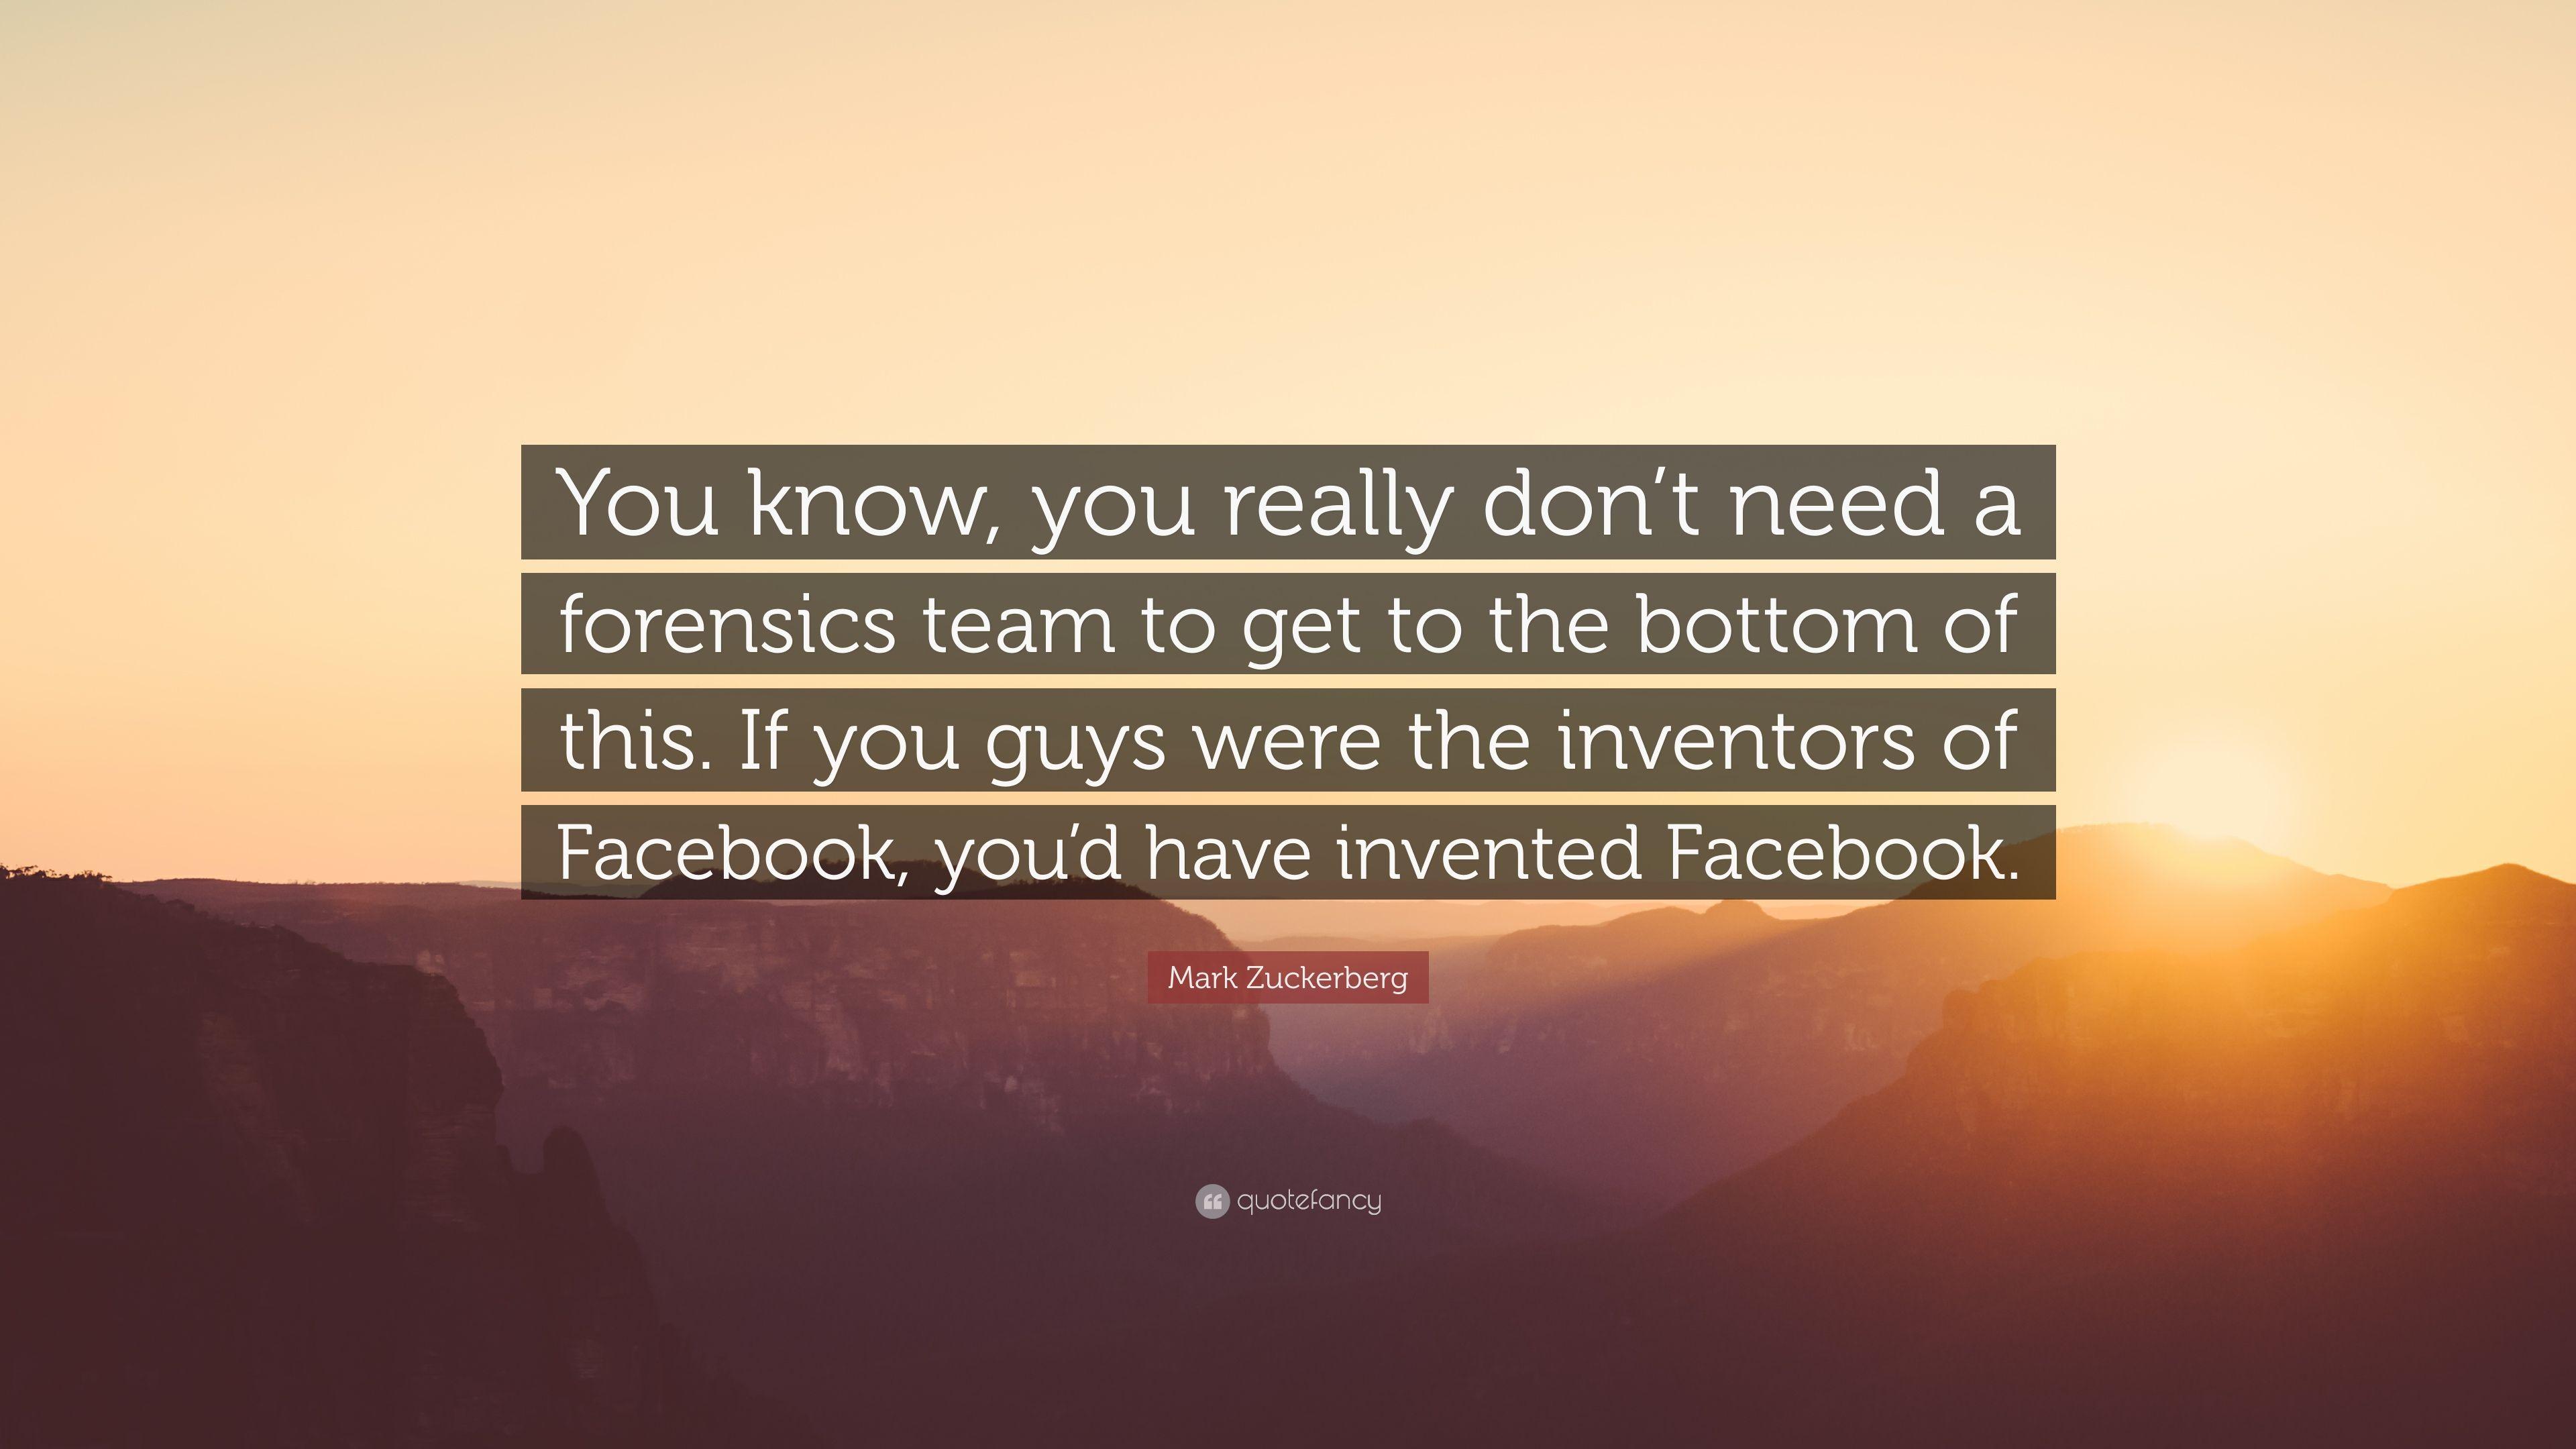 Mark Zuckerberg Quote: “You know, you really don't need a forensics